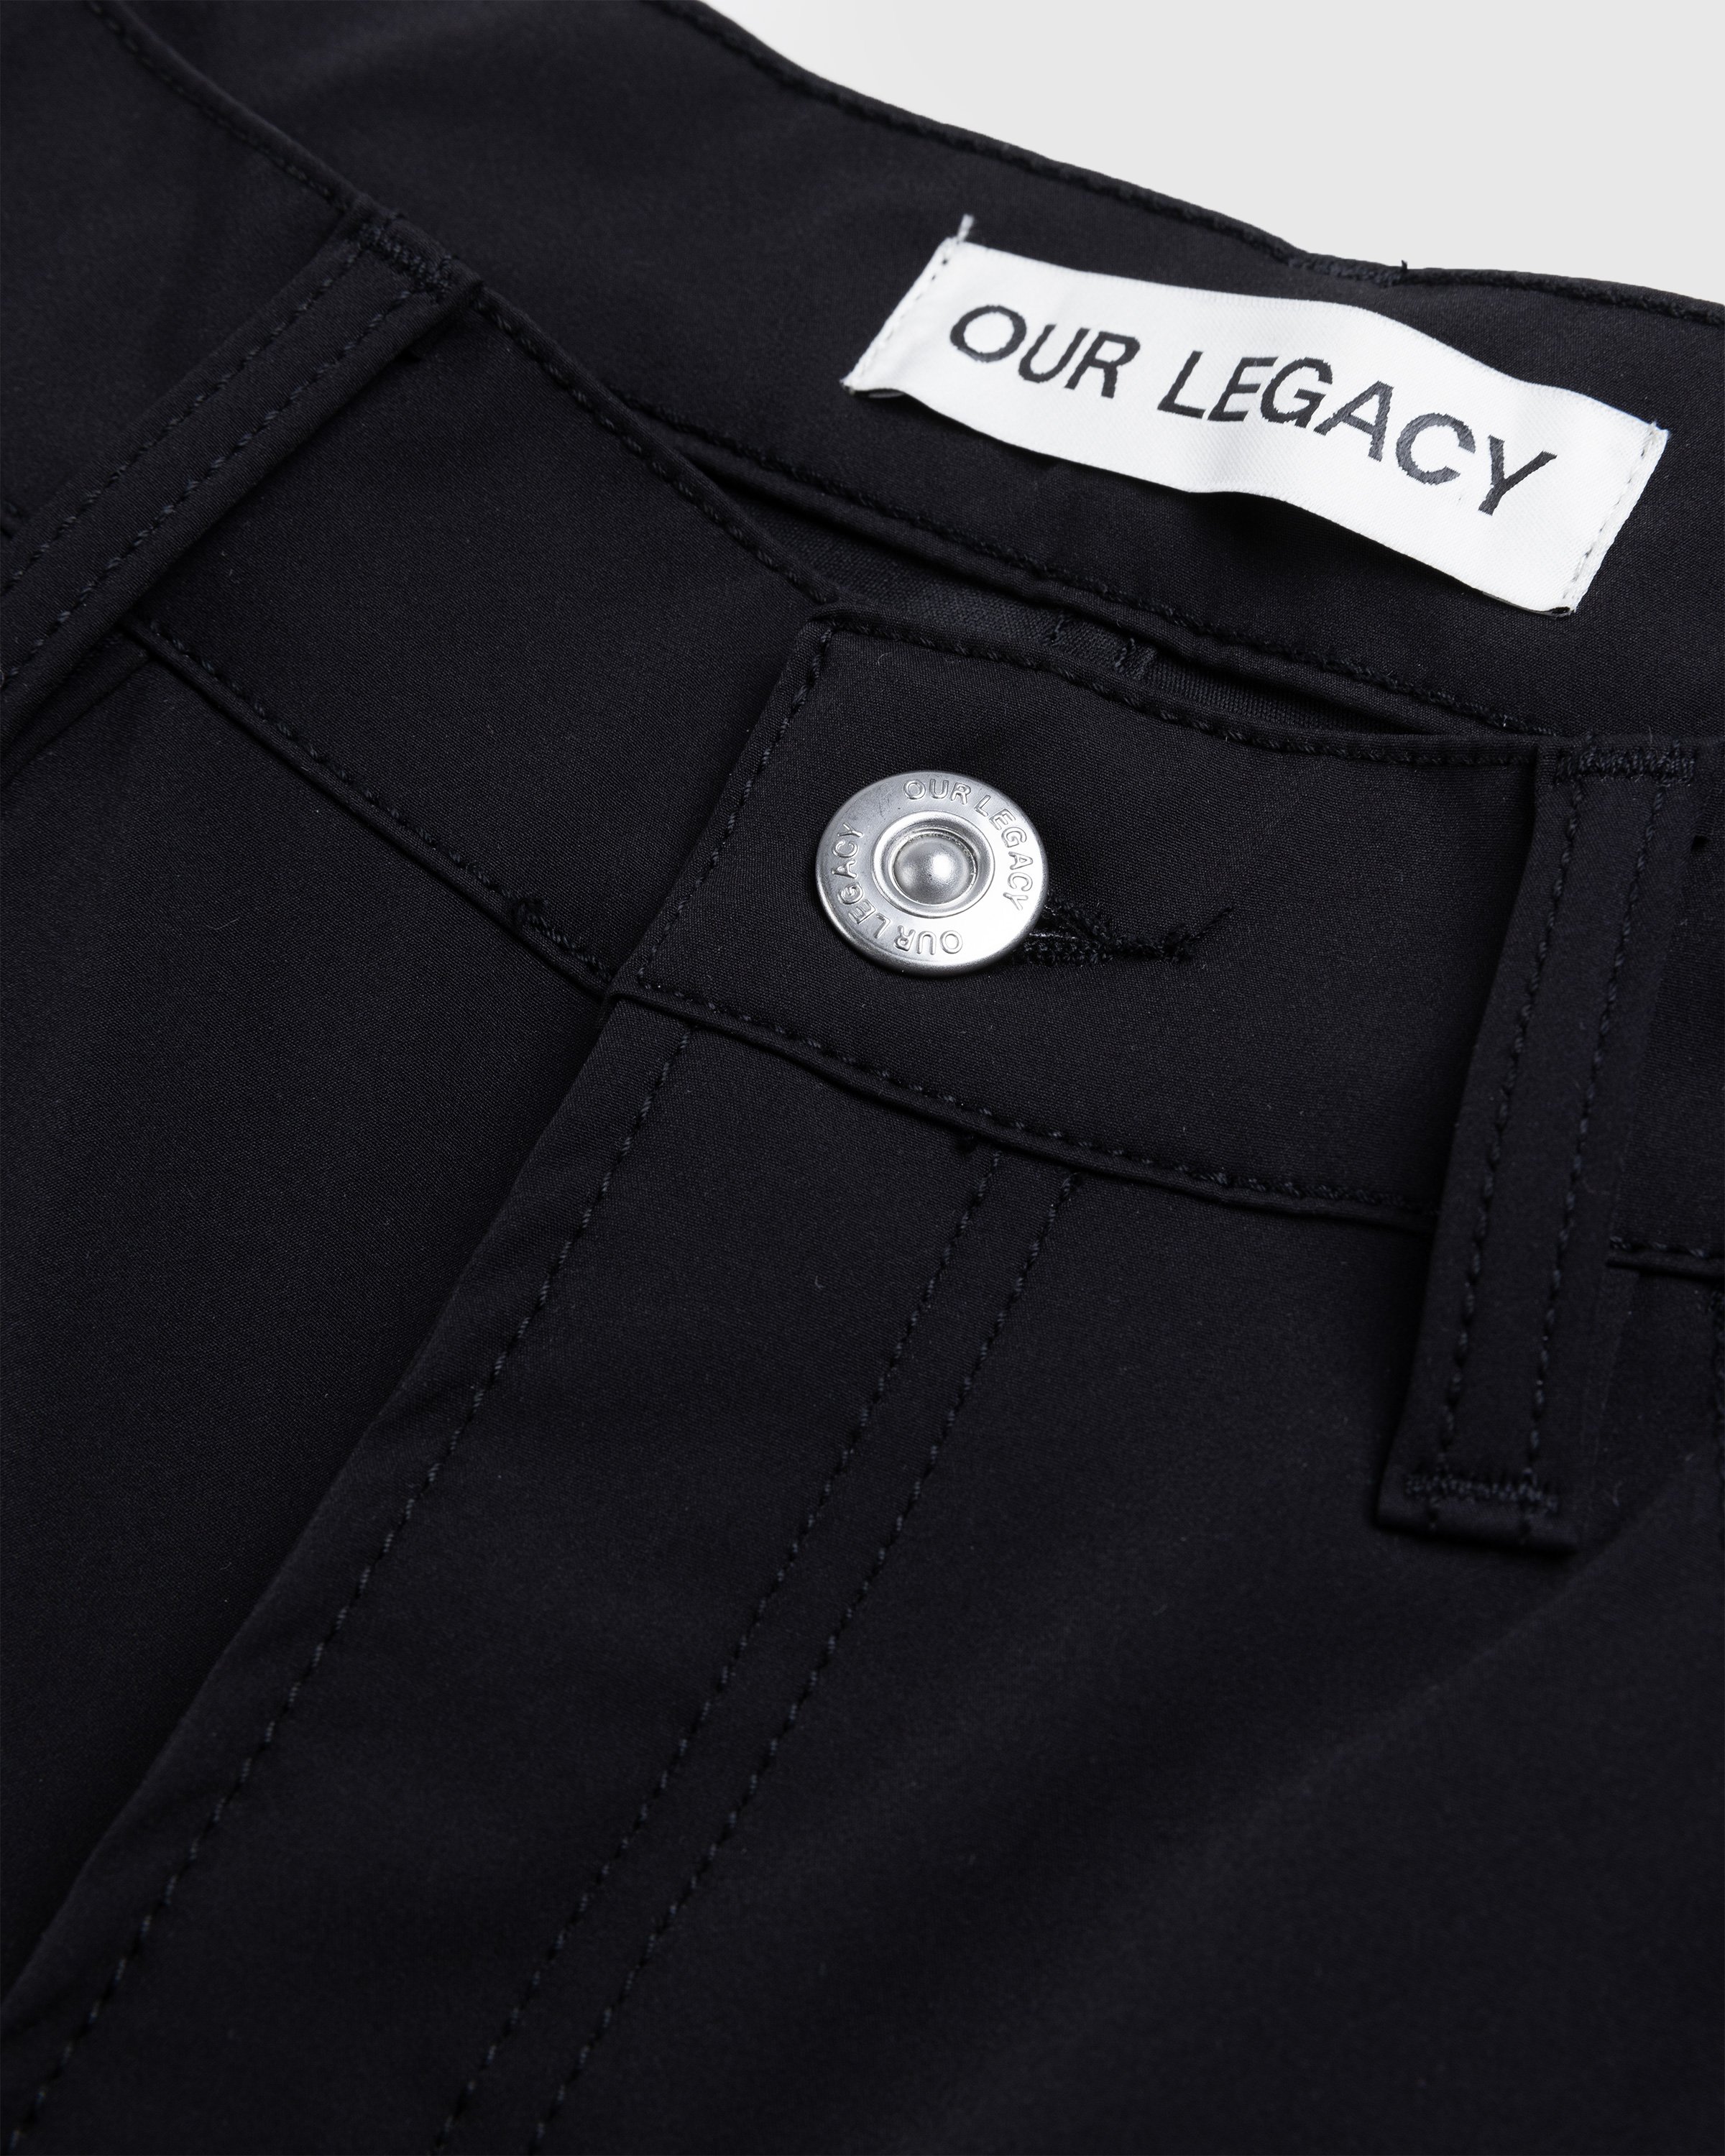 Our Legacy - Formal Cut Black Muted Scuba - Clothing - Black - Image 4